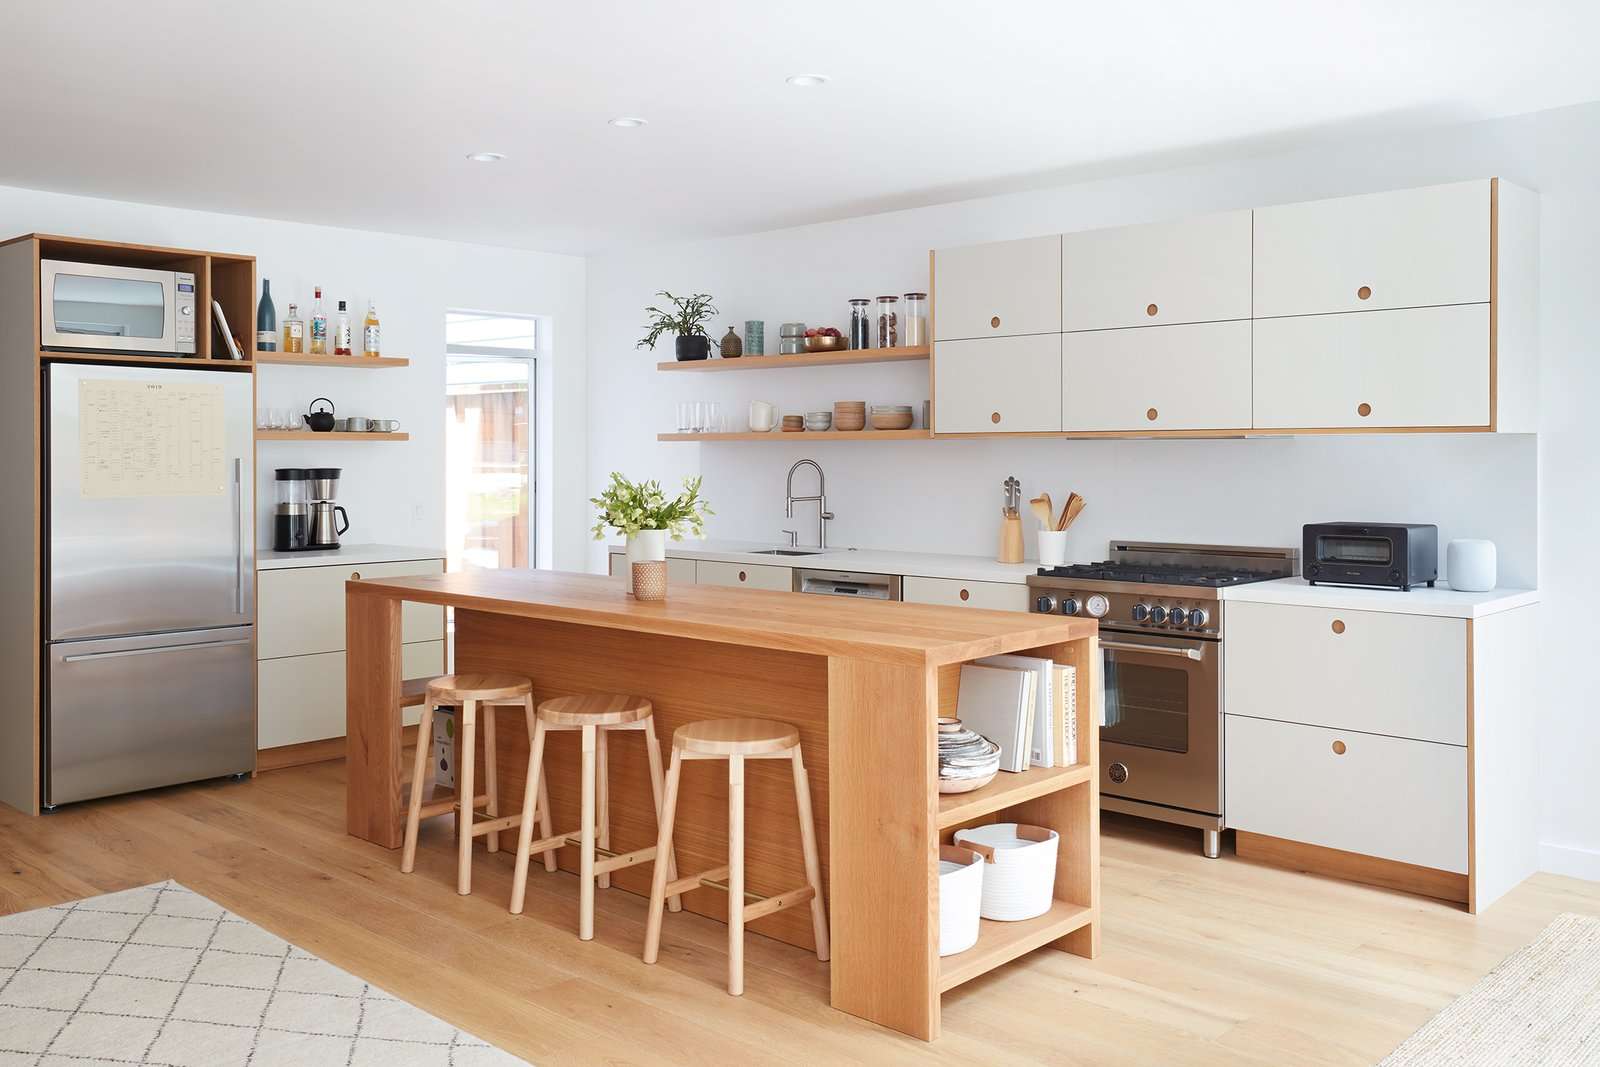 This lovely kitchen features laminate cabinets by Danish brand Reform.